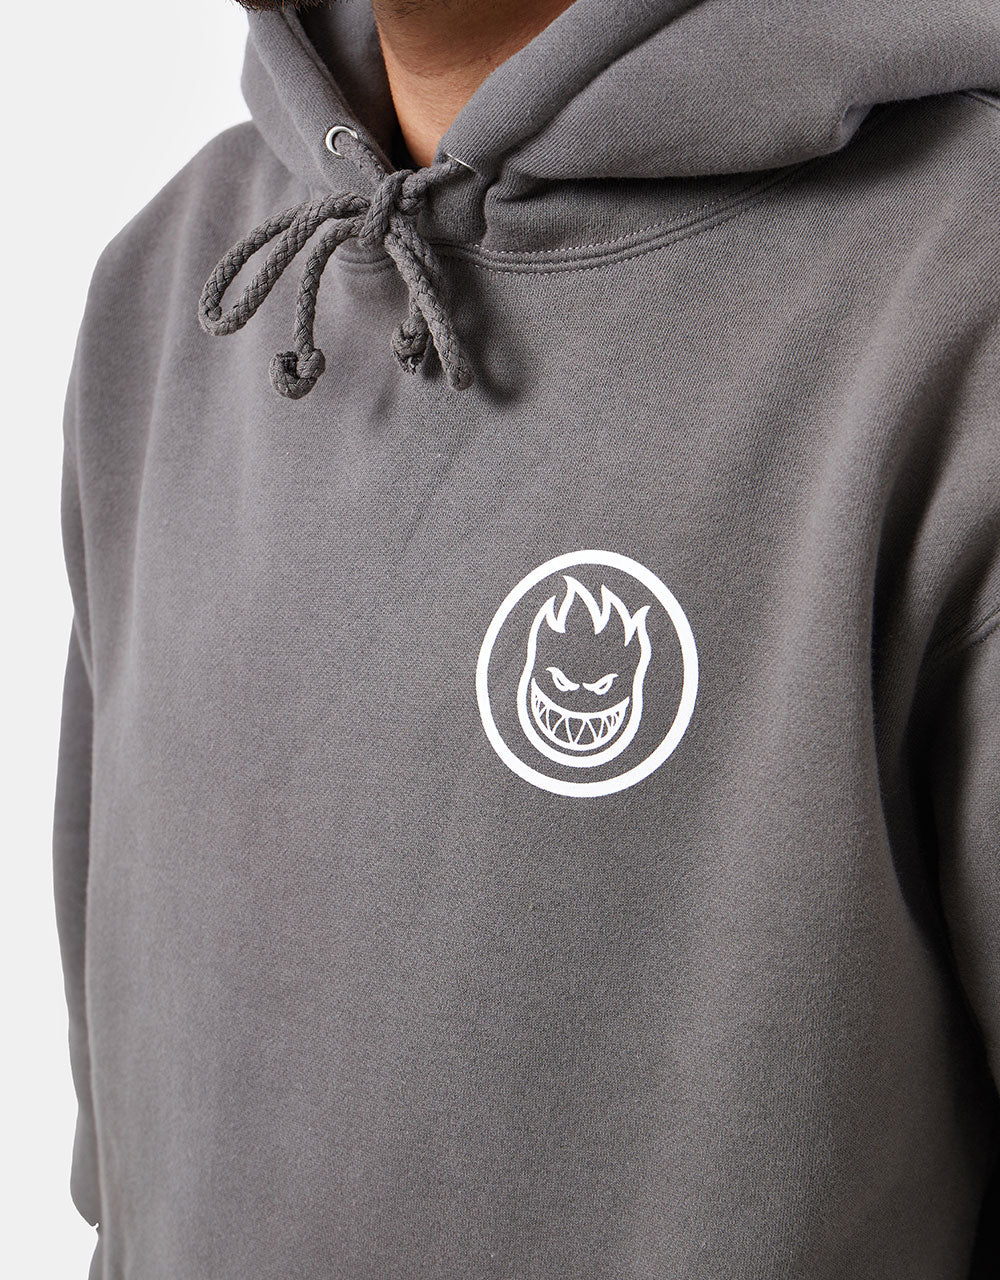 Spitfire Swirled Classic Pullover Hoodie - Charcoal/White